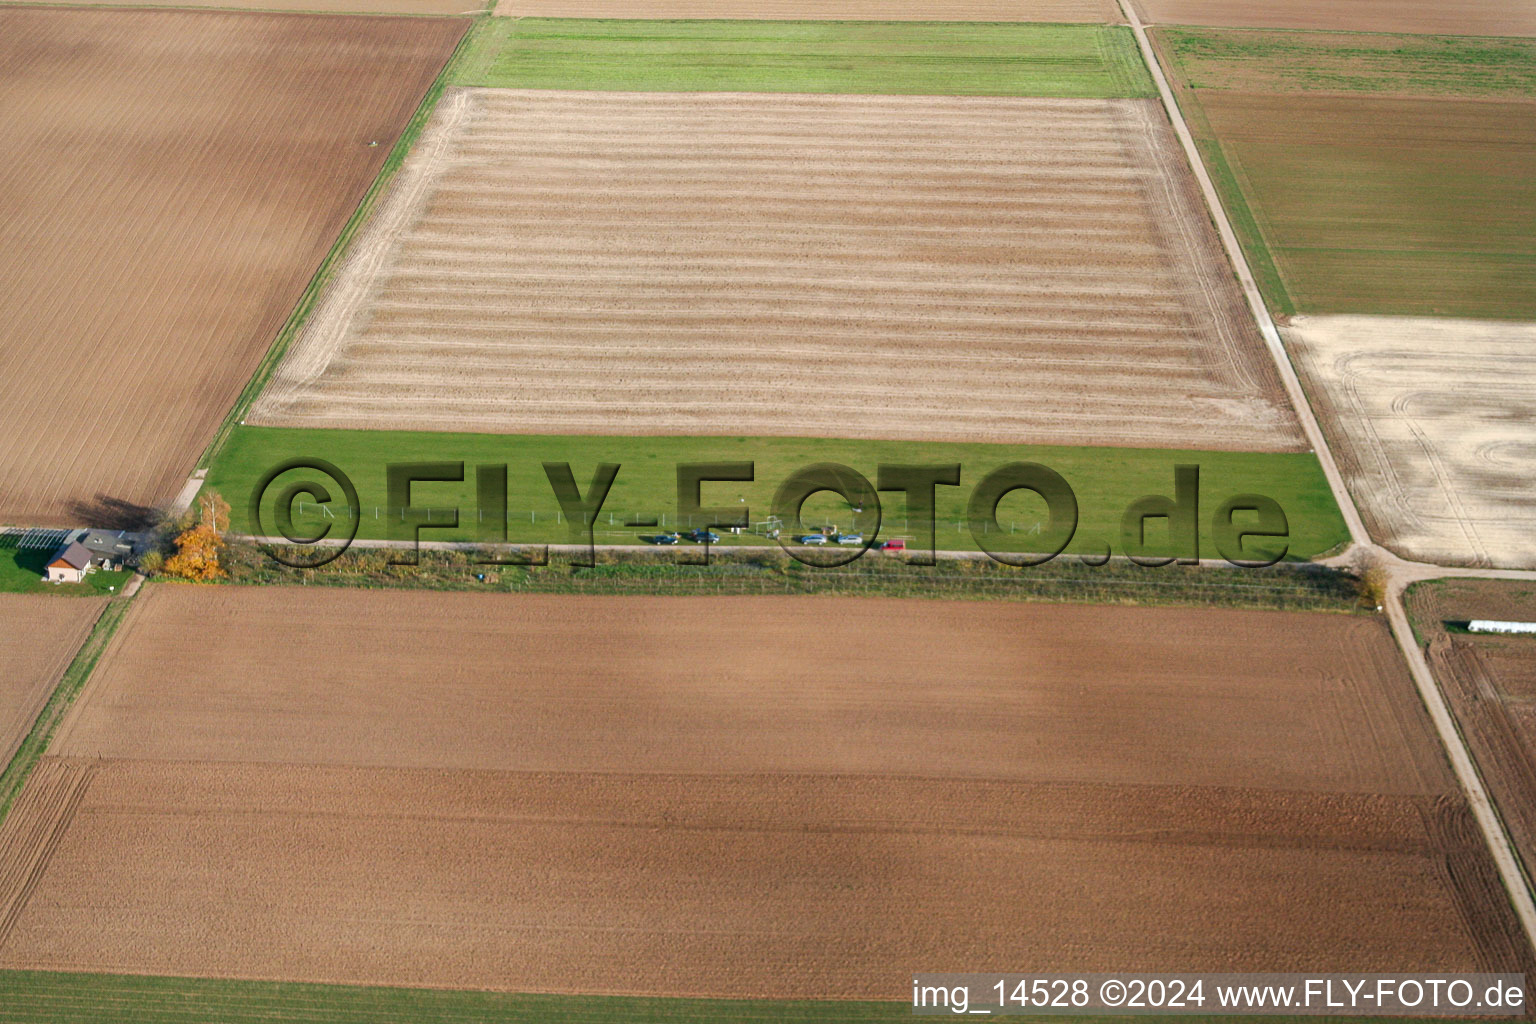 Aerial view of Model airfield in Offenbach an der Queich in the state Rhineland-Palatinate, Germany